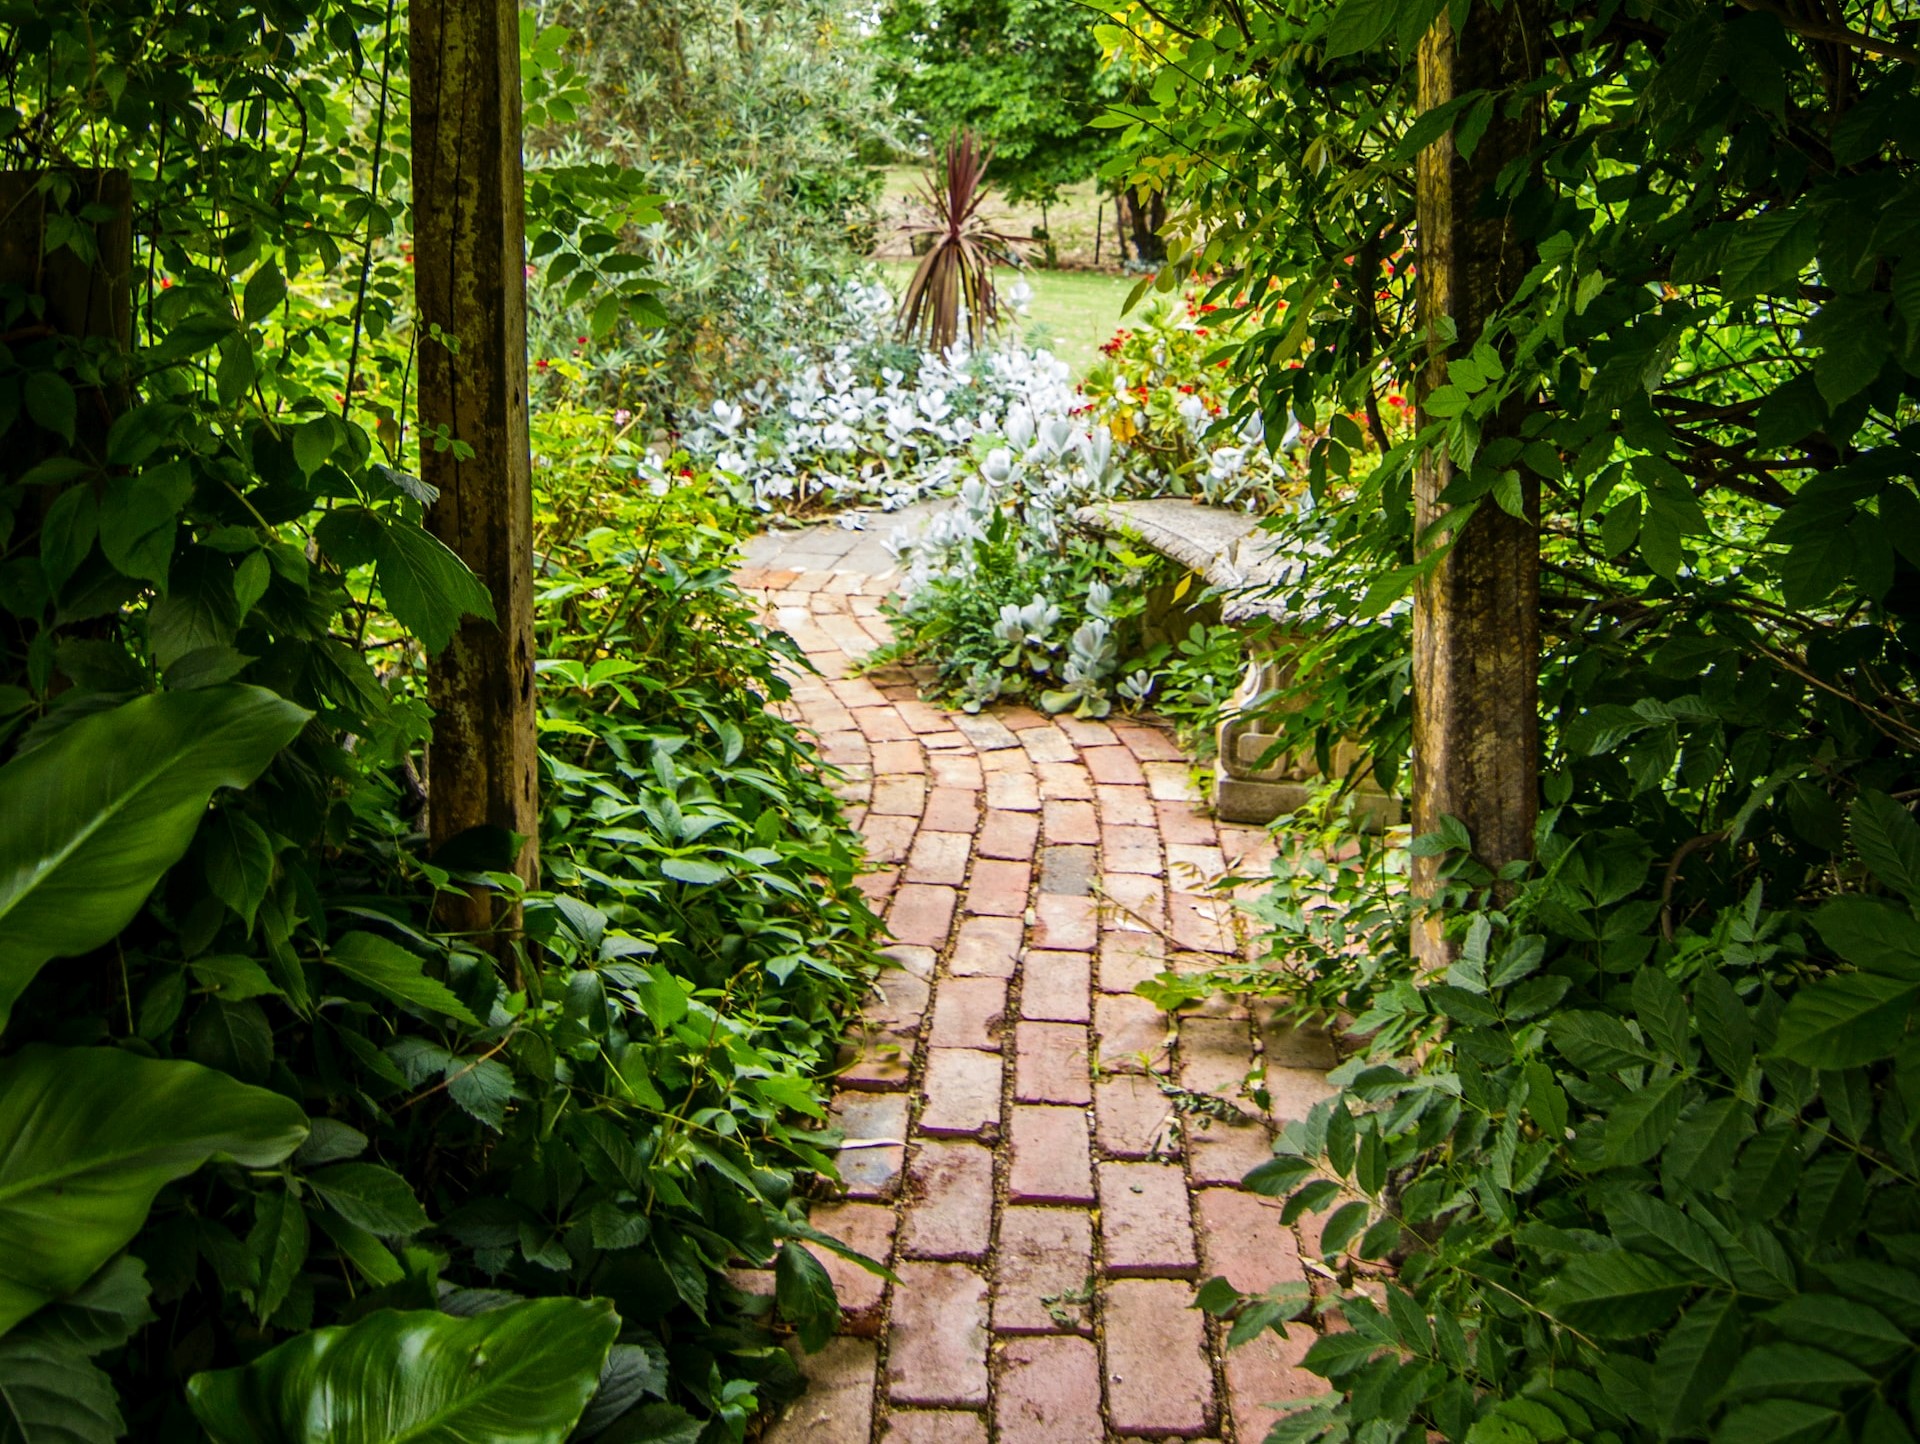 What to make paths in the garden from?